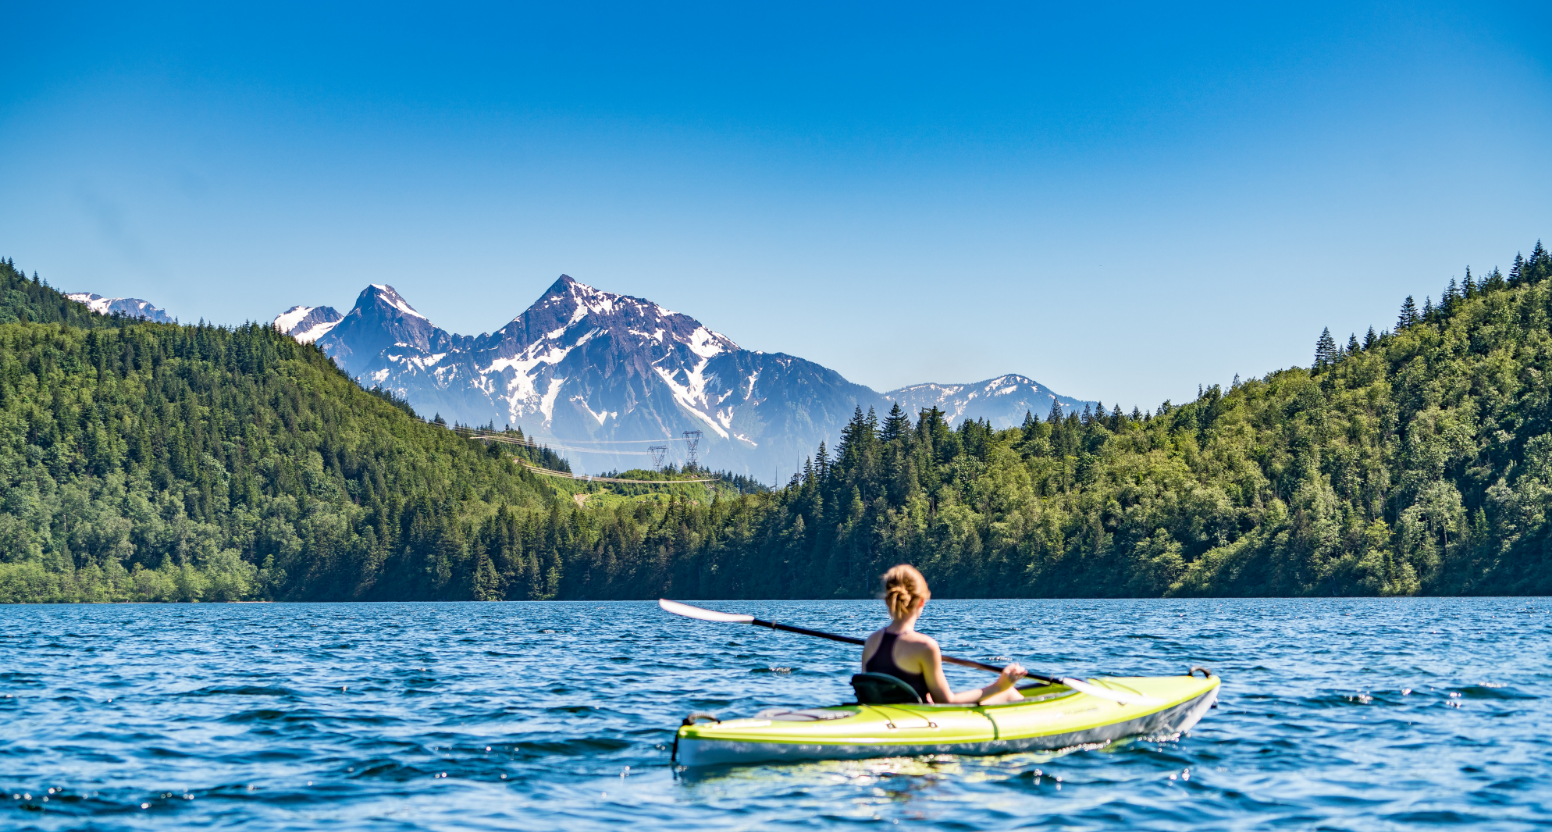 Person kayaking in a lake with mountains in the background